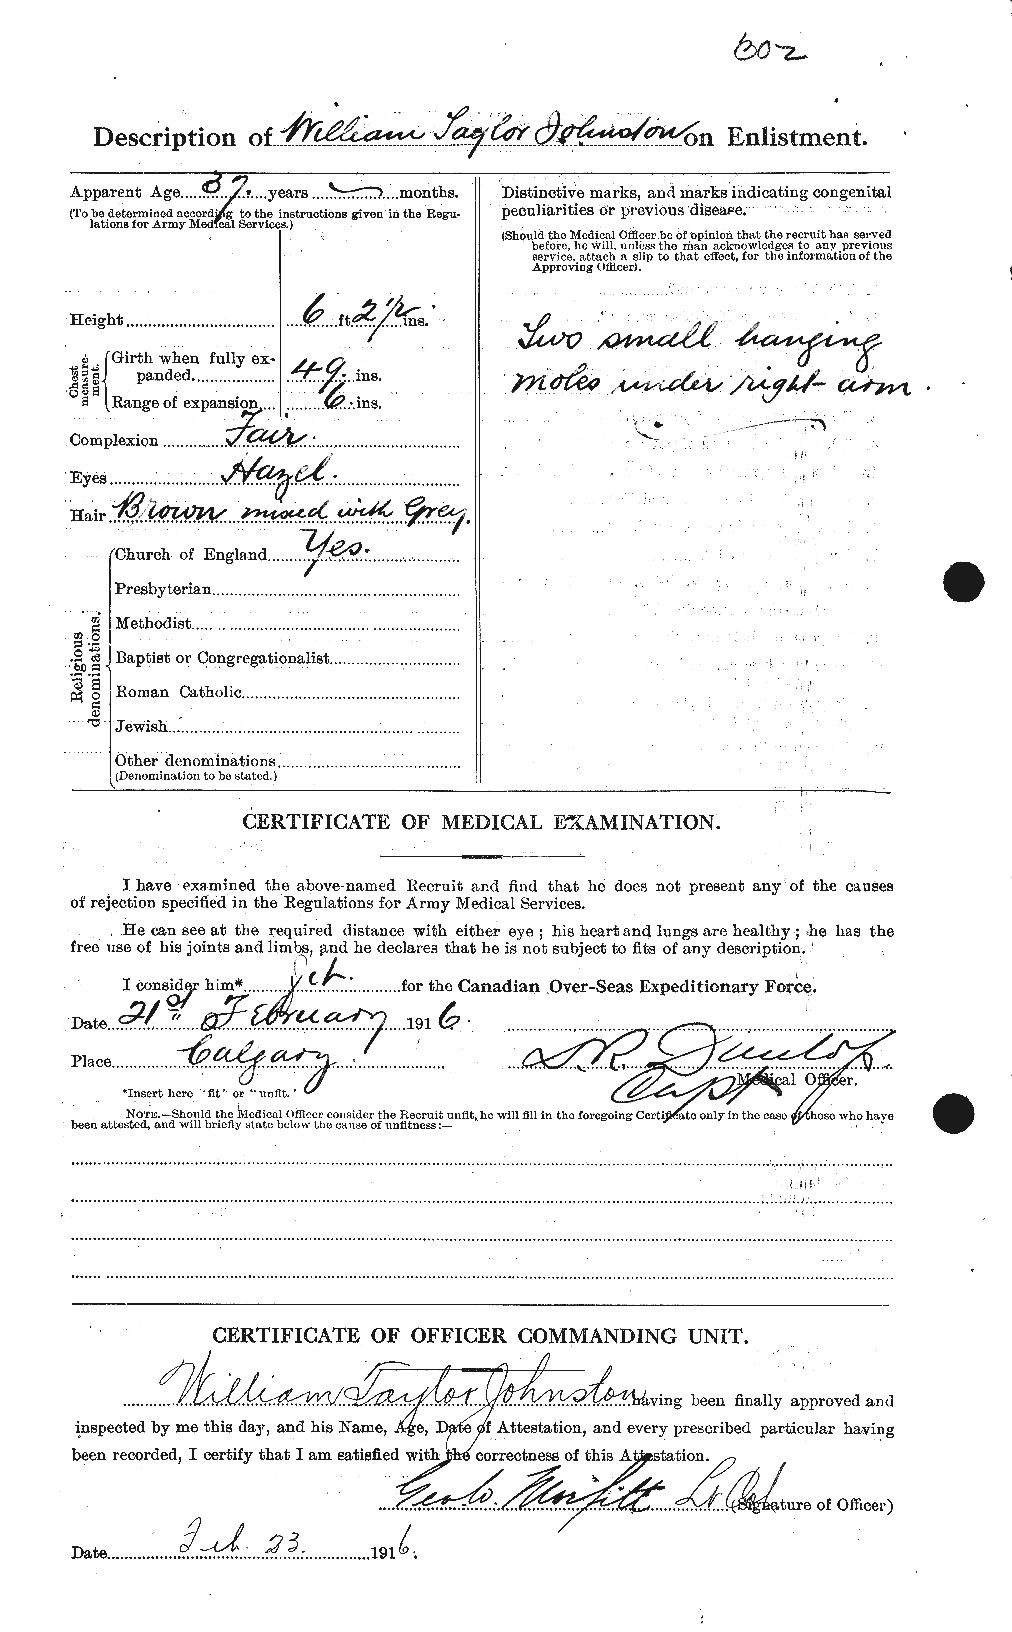 Personnel Records of the First World War - CEF 429624b